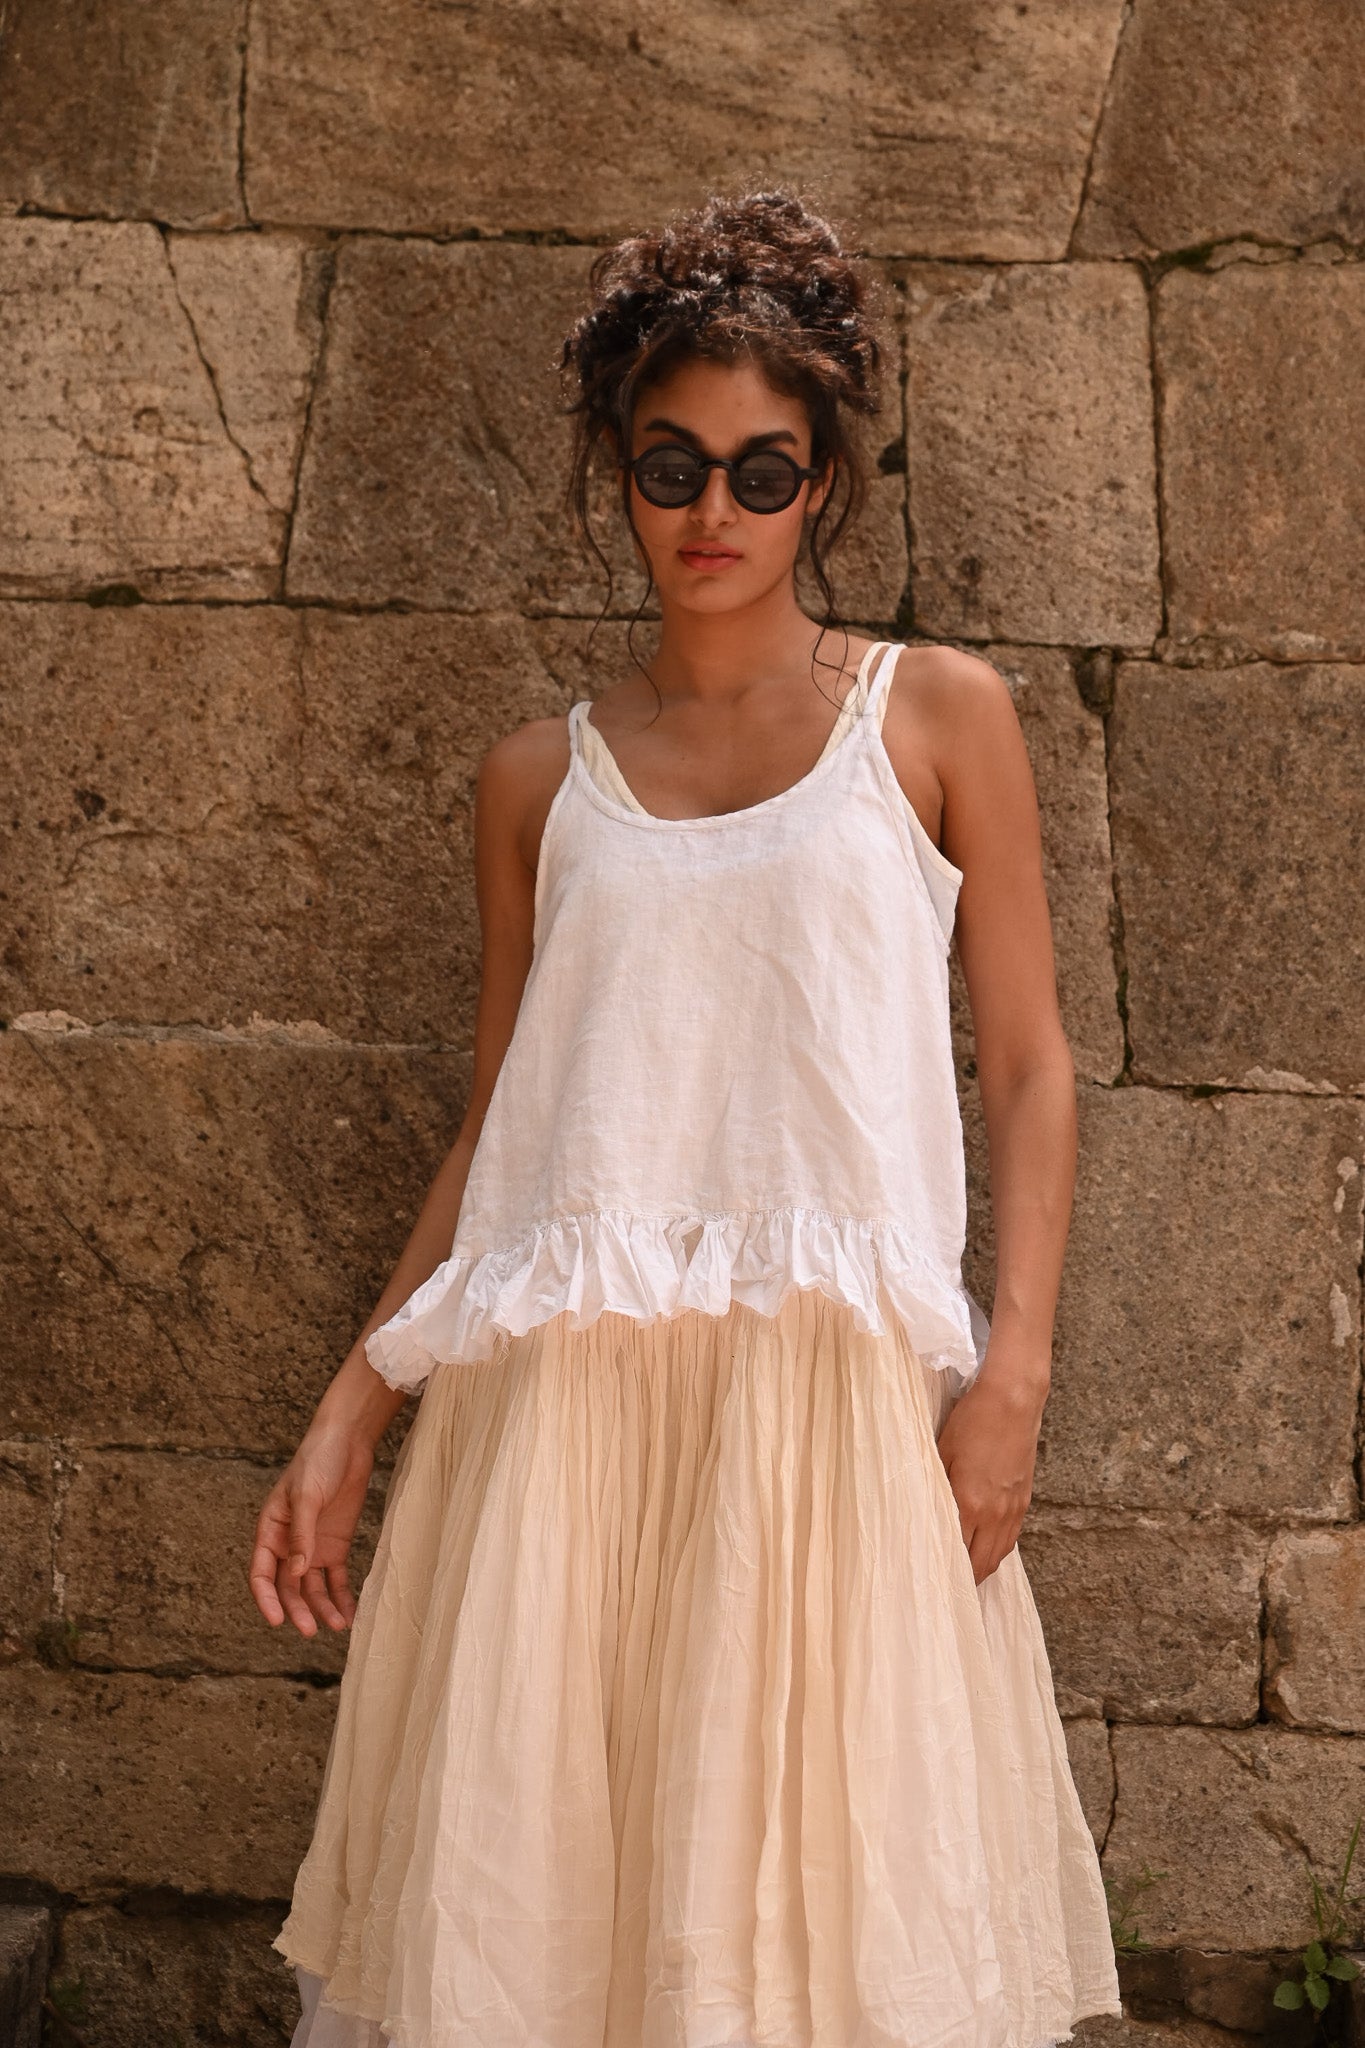 A MegbyDesign model is wearing a white elisa cami made from a lightweight cotton material and the straps are adjustable.